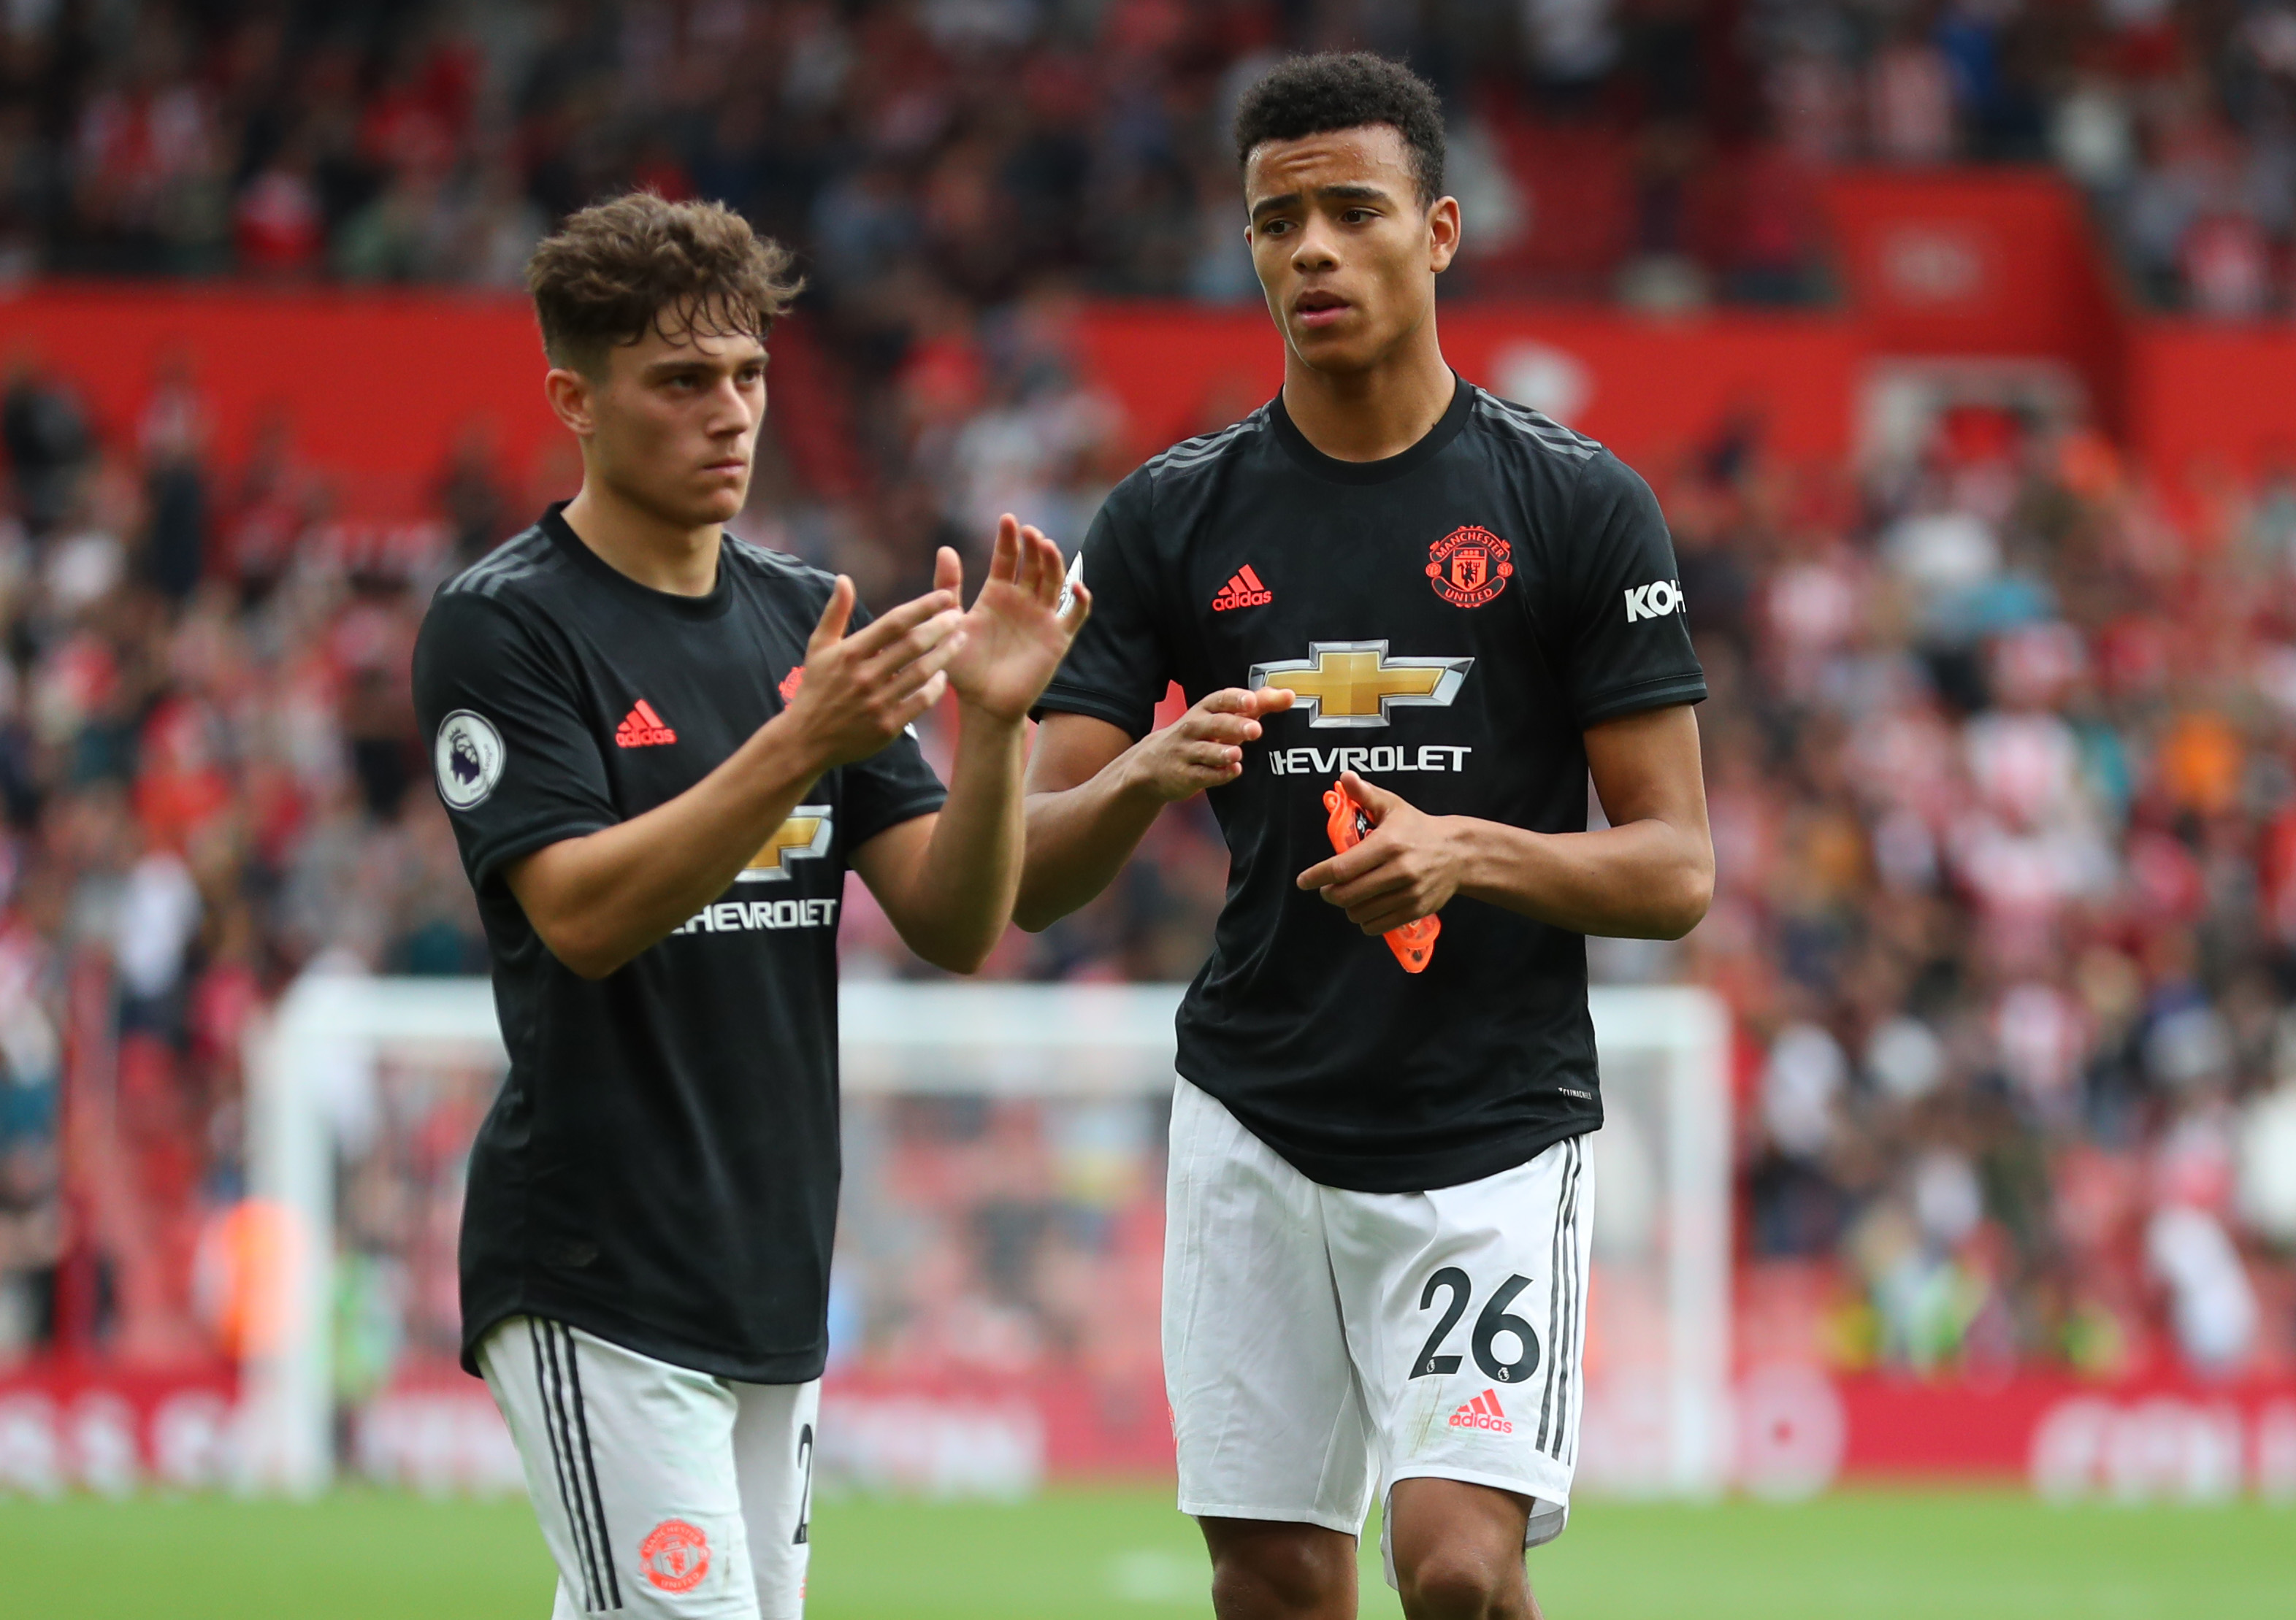 SOUTHAMPTON, ENGLAND - AUGUST 31: Dan James and Mason Greenwood of Manchester United after the Premier League match between Southampton FC and Manchester United at St Mary's Stadium on August 31, 2019 in Southampton, United Kingdom. (Photo by Catherine Ivill/Getty Images)